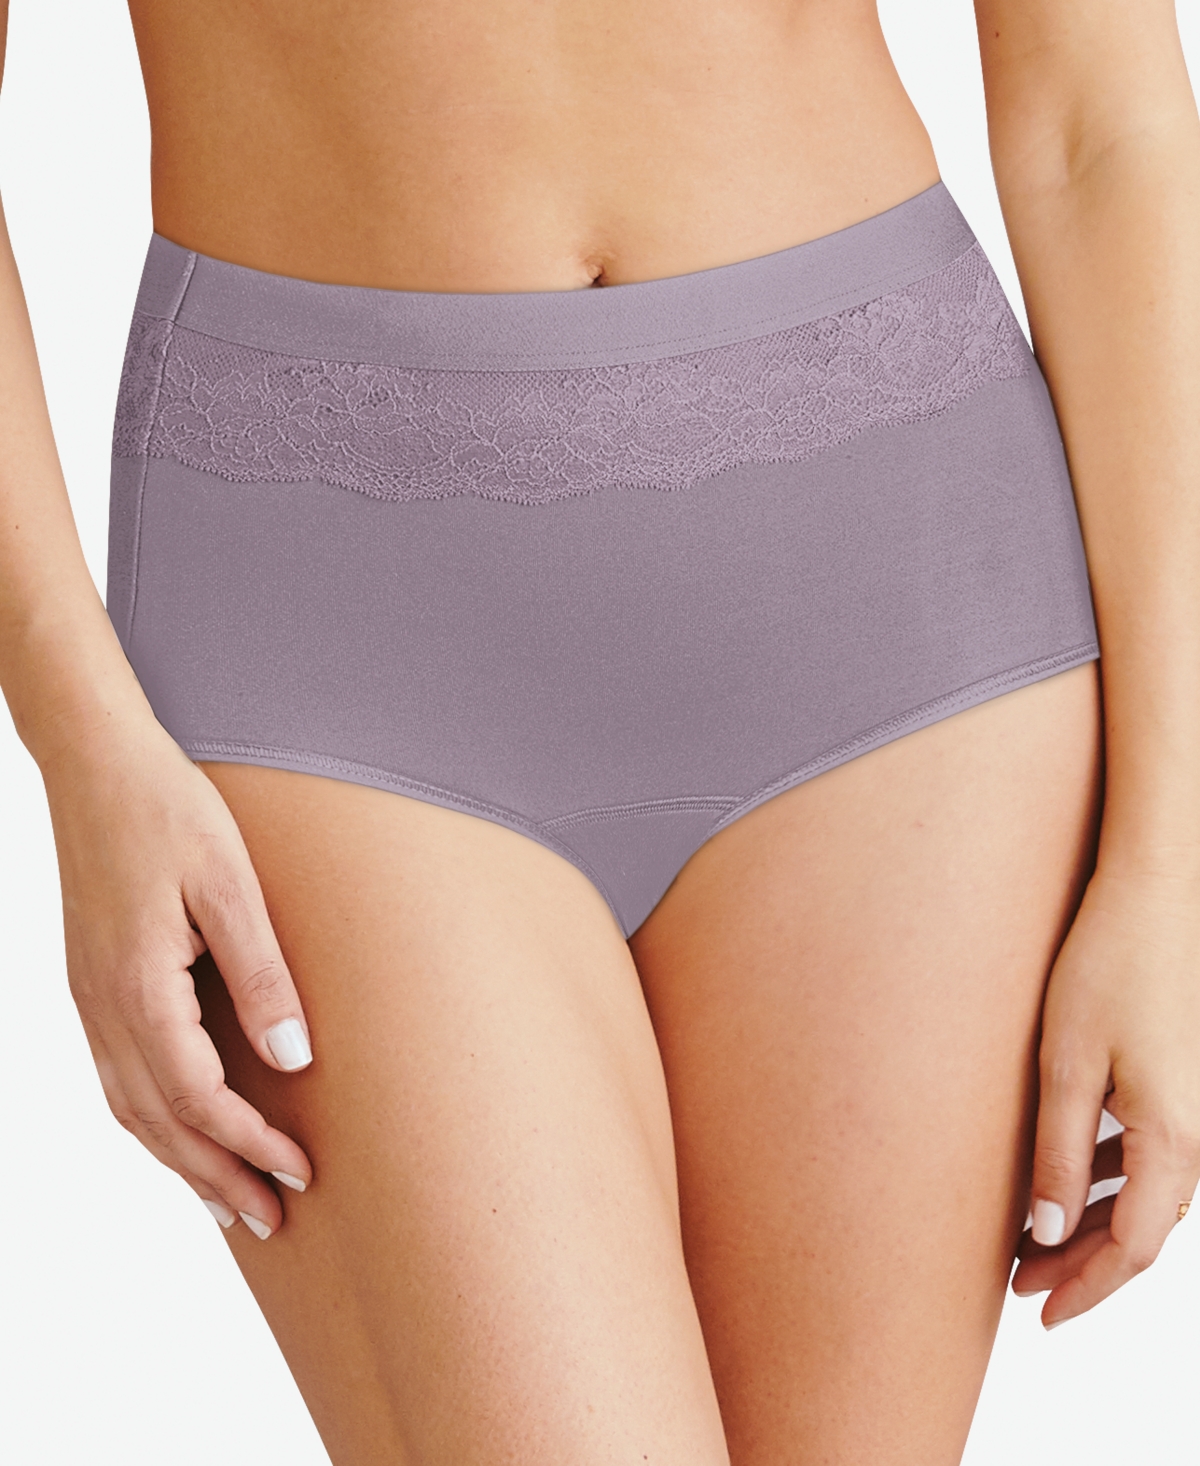 Women's Beautifully Confident Brief Period Underwear With Light Leak Protection DFLLB1 - Perfect Purple